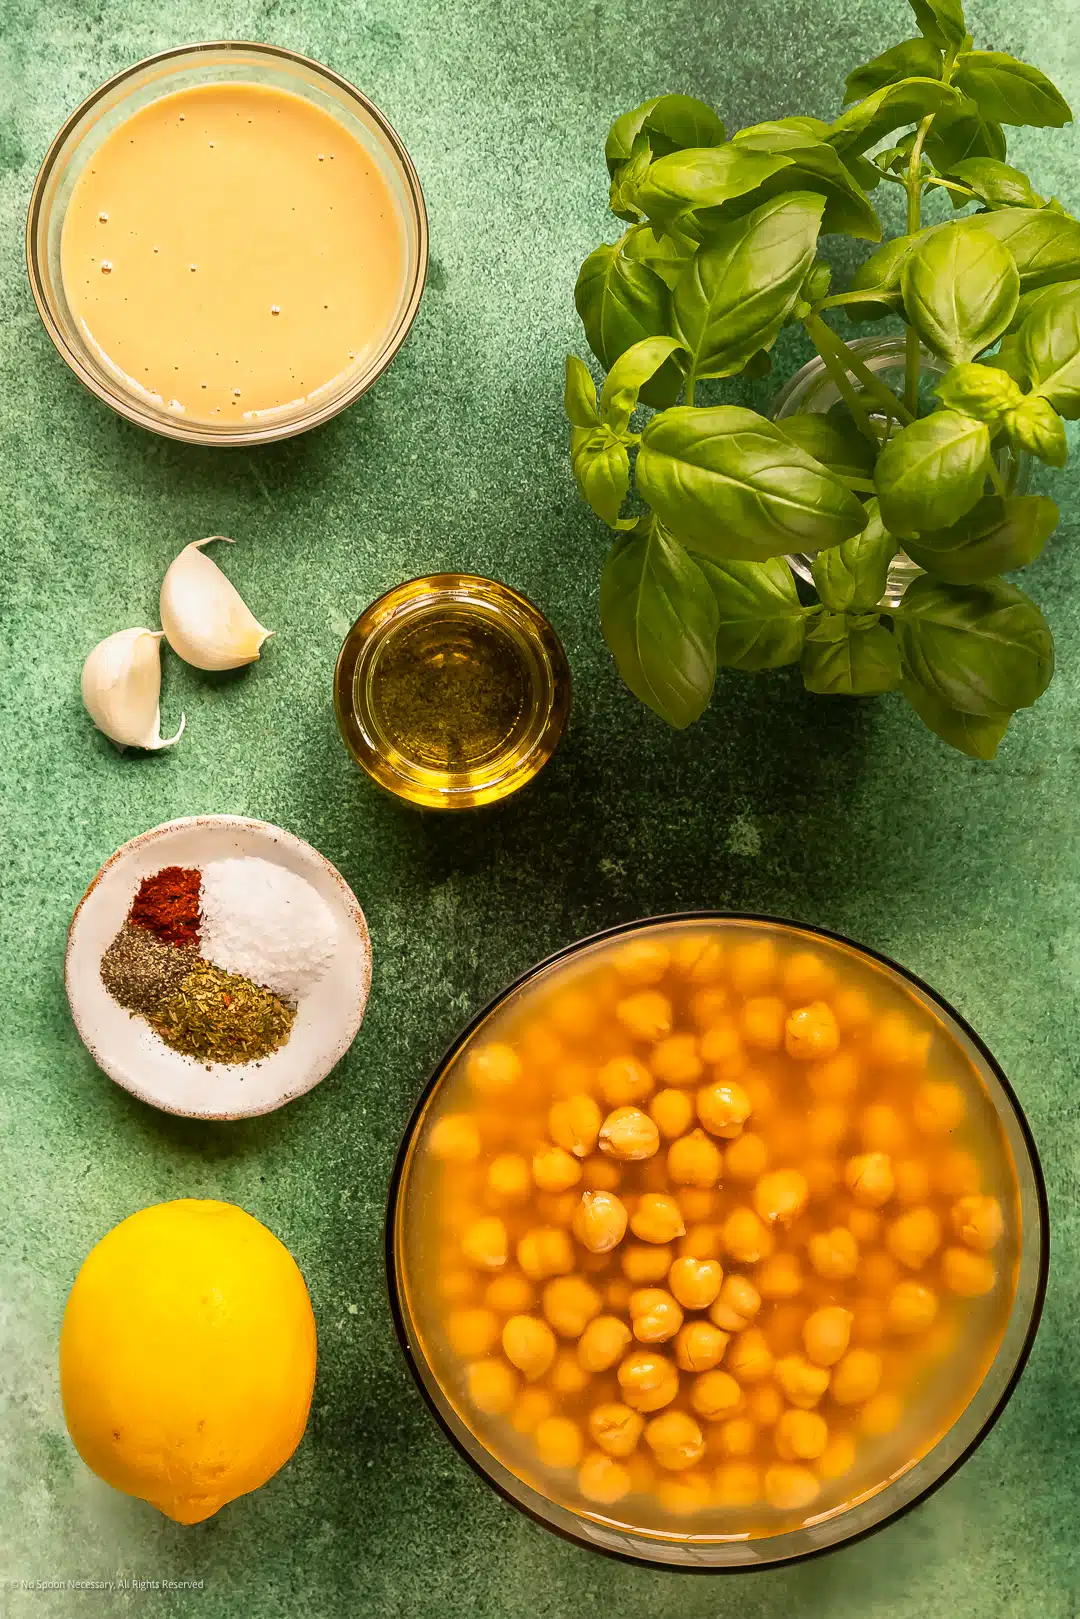 Overhead photo of a fresh basil plant, canned chickpeas, tahini, garlic cloves, and spices neatly arranged on a kitchen counter.